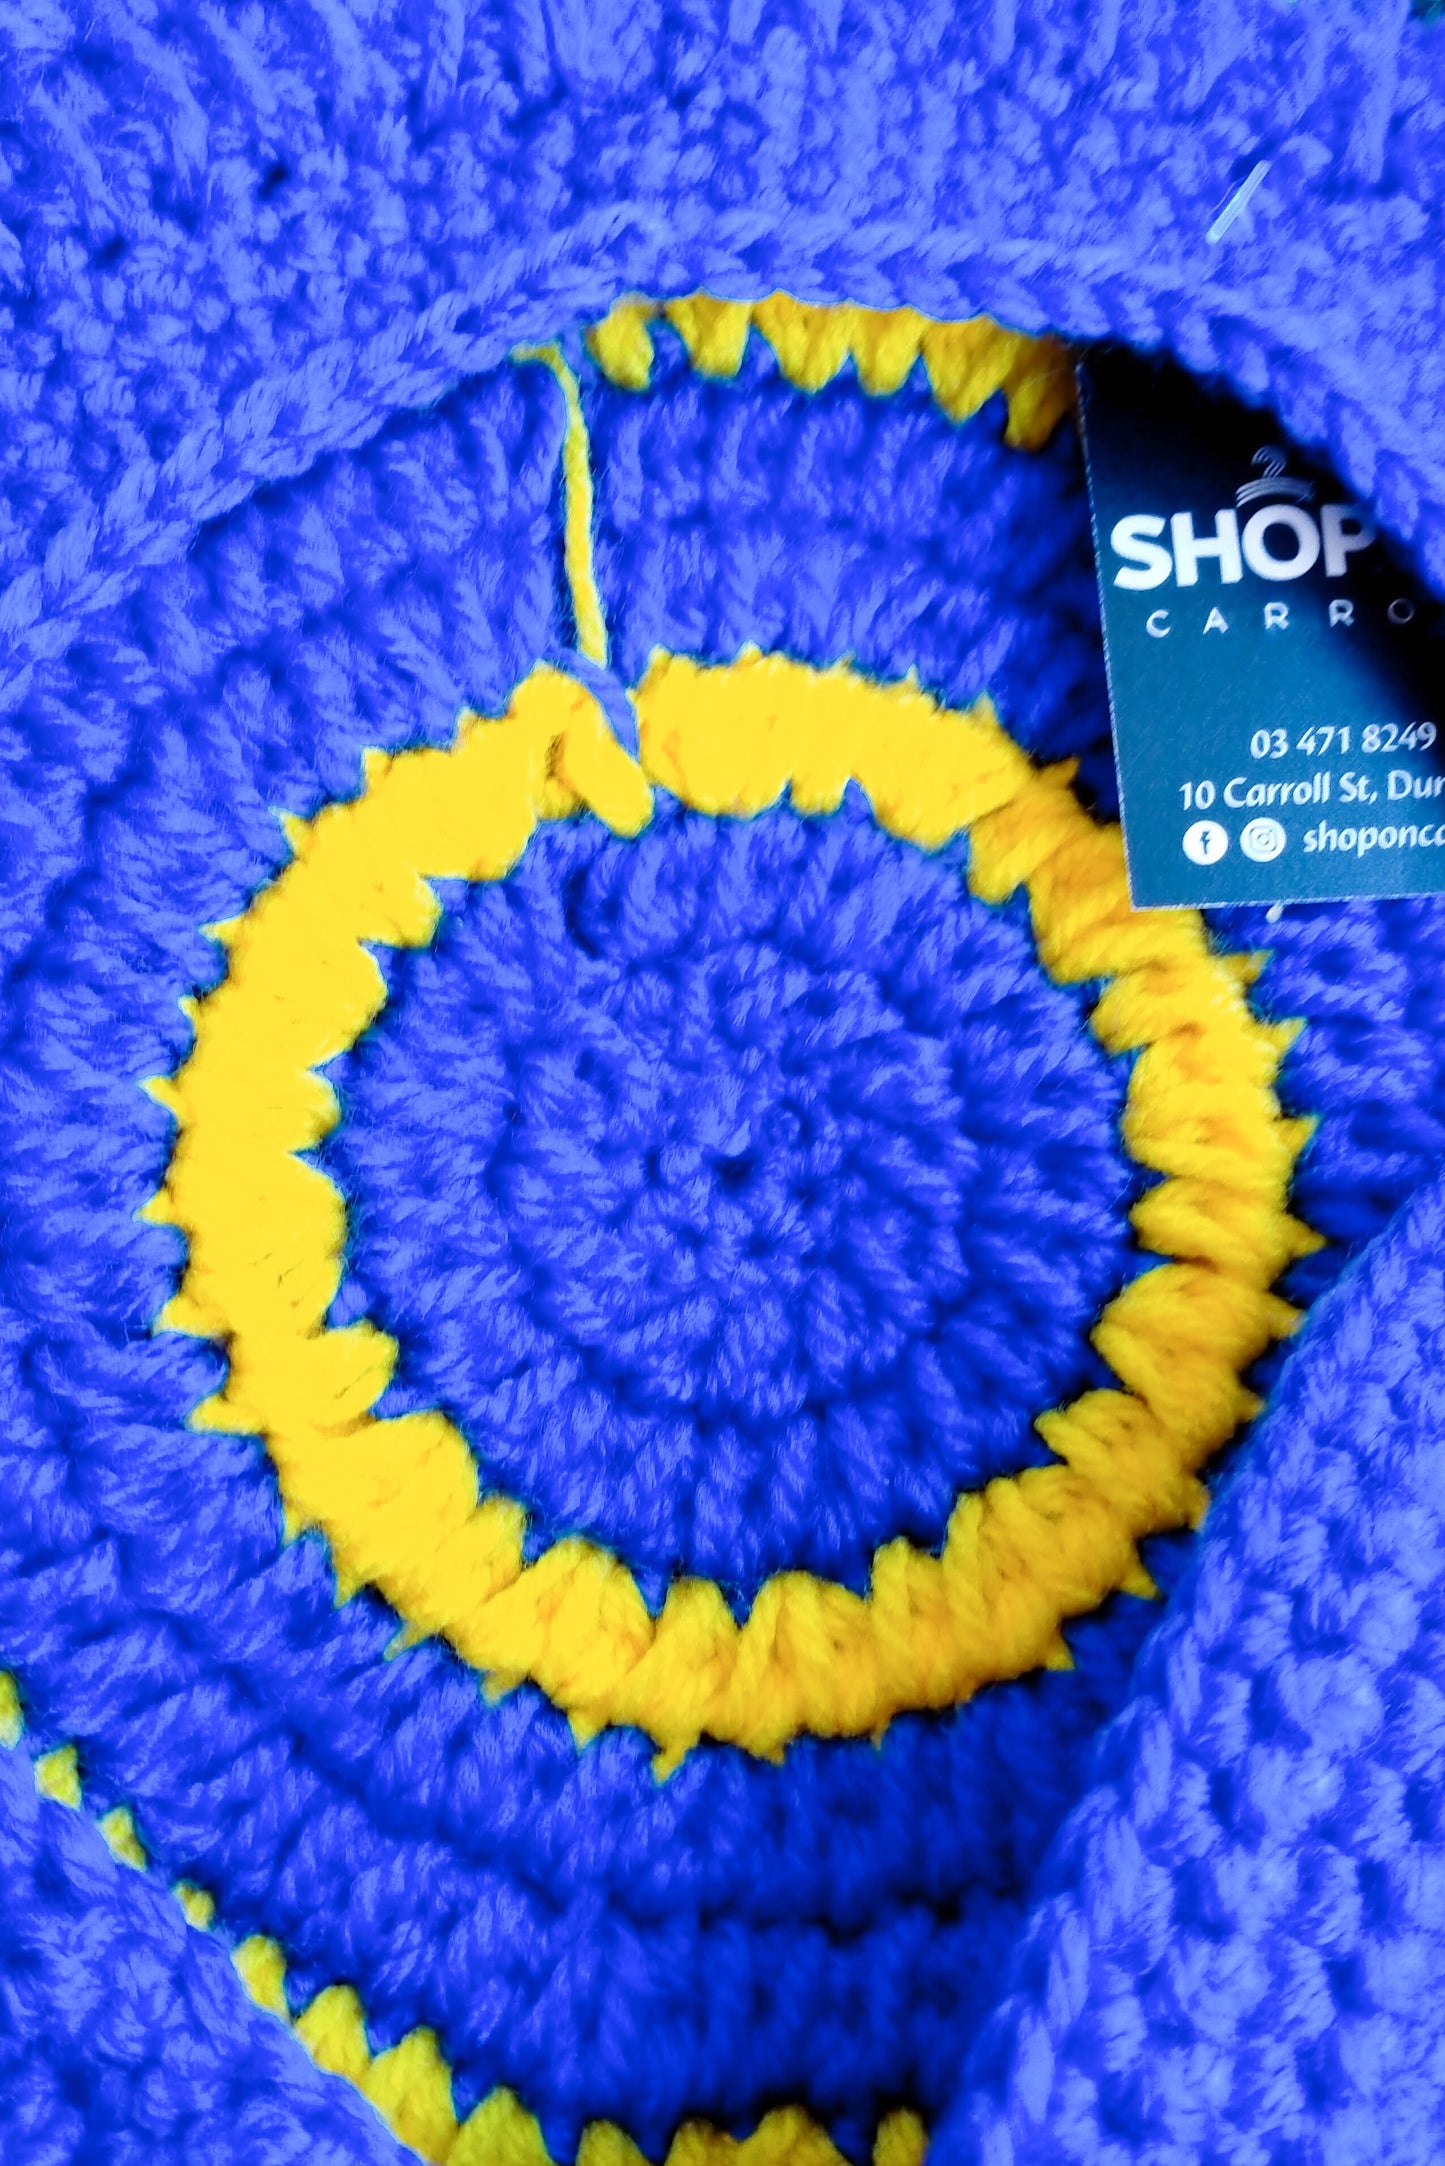 Blue and yellow crocheted newsboy cap